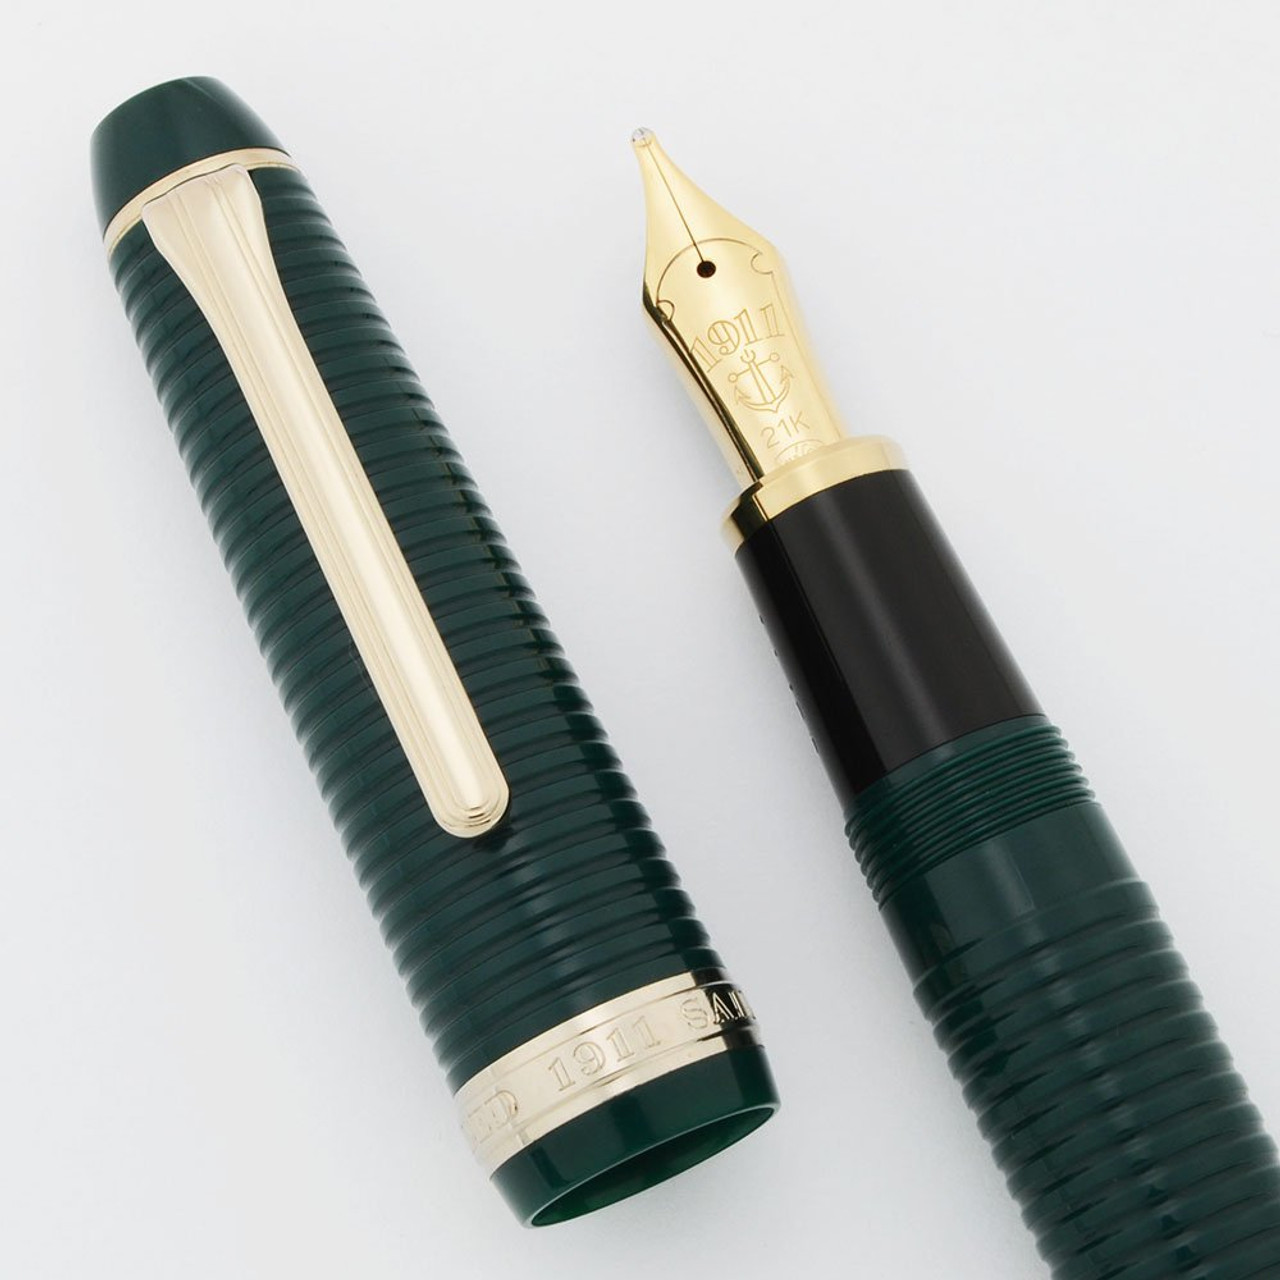 Sailor 1911 Ribbed Fountain Pen LE (14/20) - Green w Gold Trim, Zoom 21k Nib (Near Mint, Works Well)